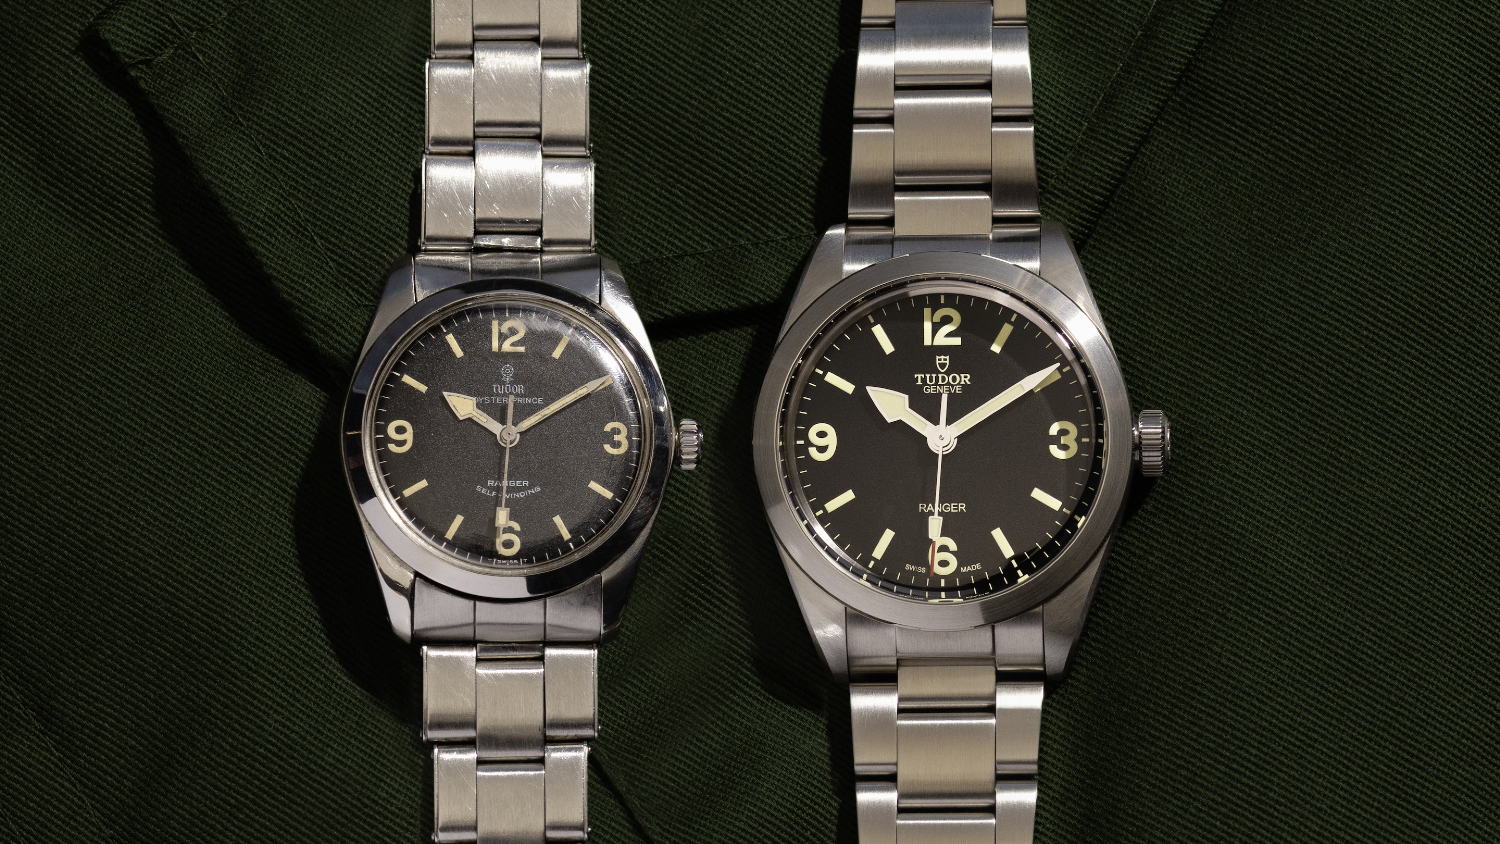 Opinion: Why I think the new Tudor is the ultimate Ranger